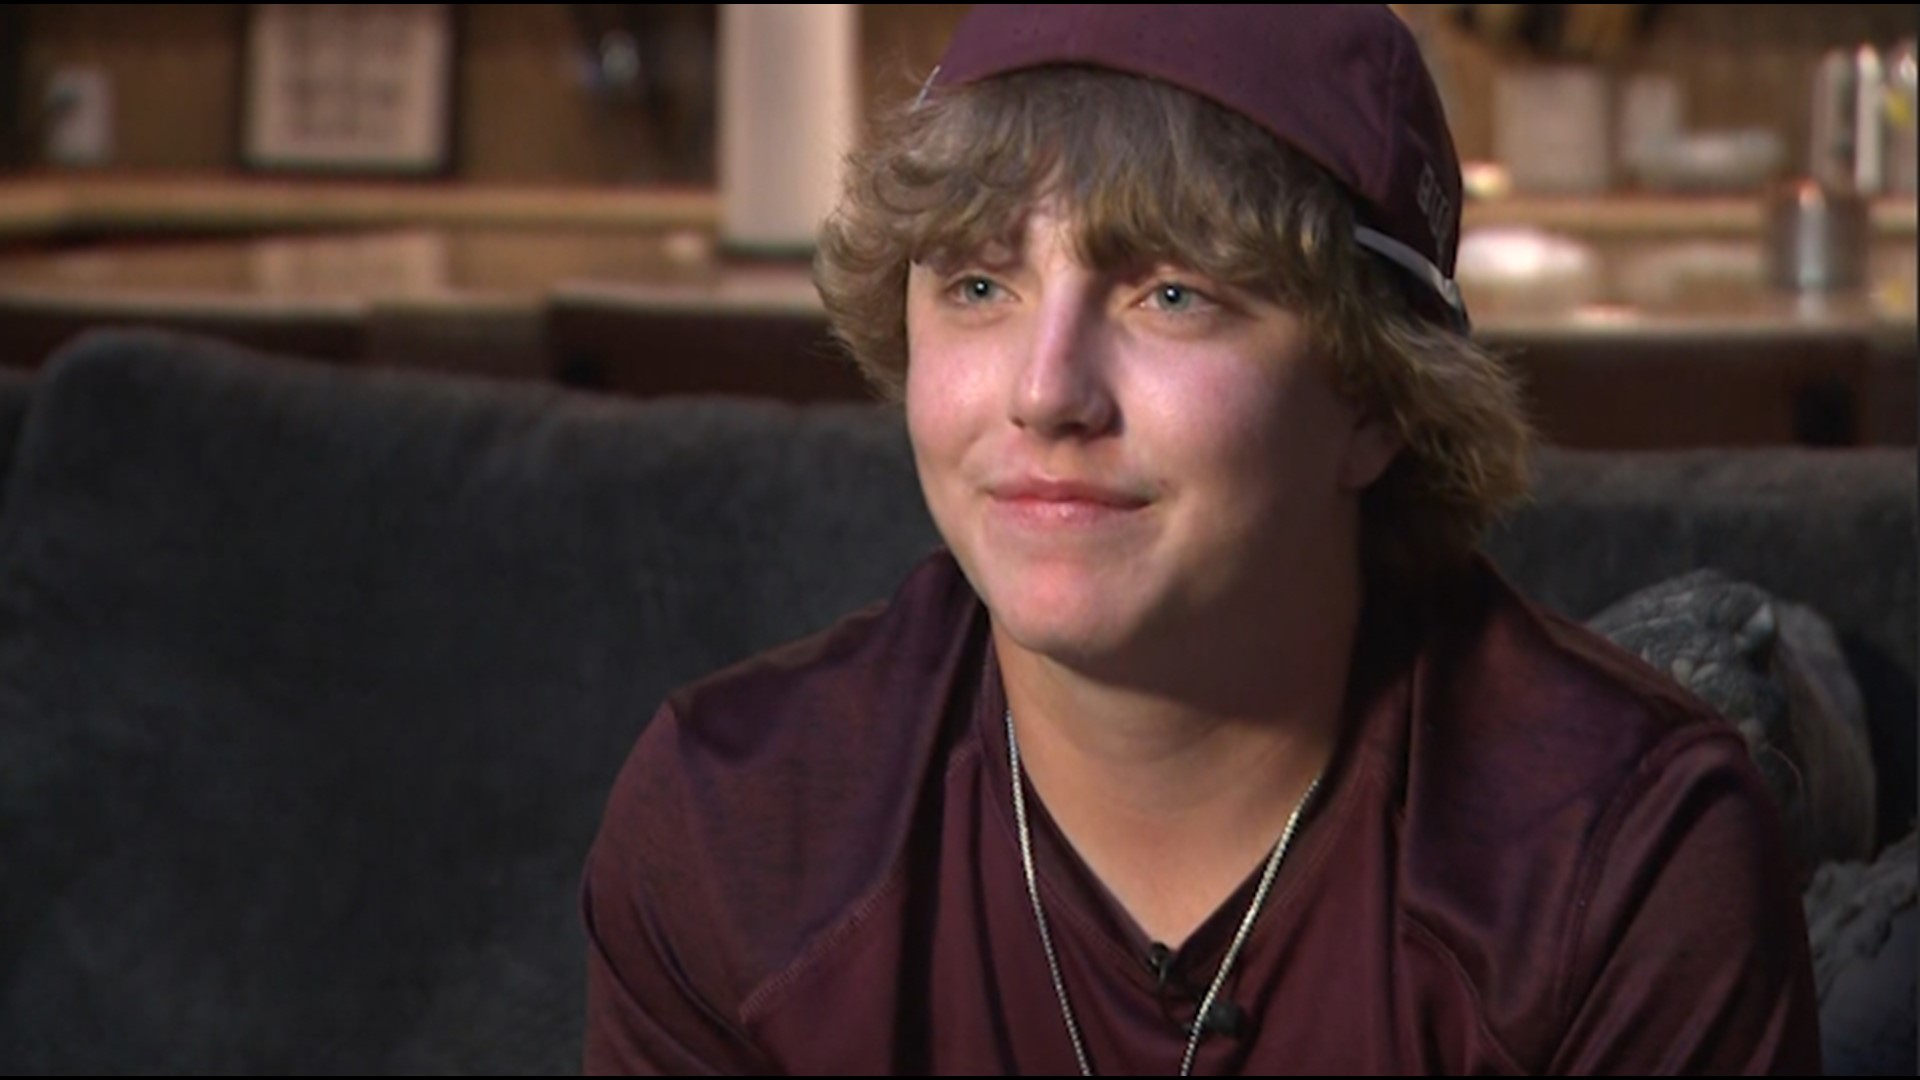 KHOU 11's Xavier Walton spoke to the Pearland Little League pitcher before his team heads to the World Series.